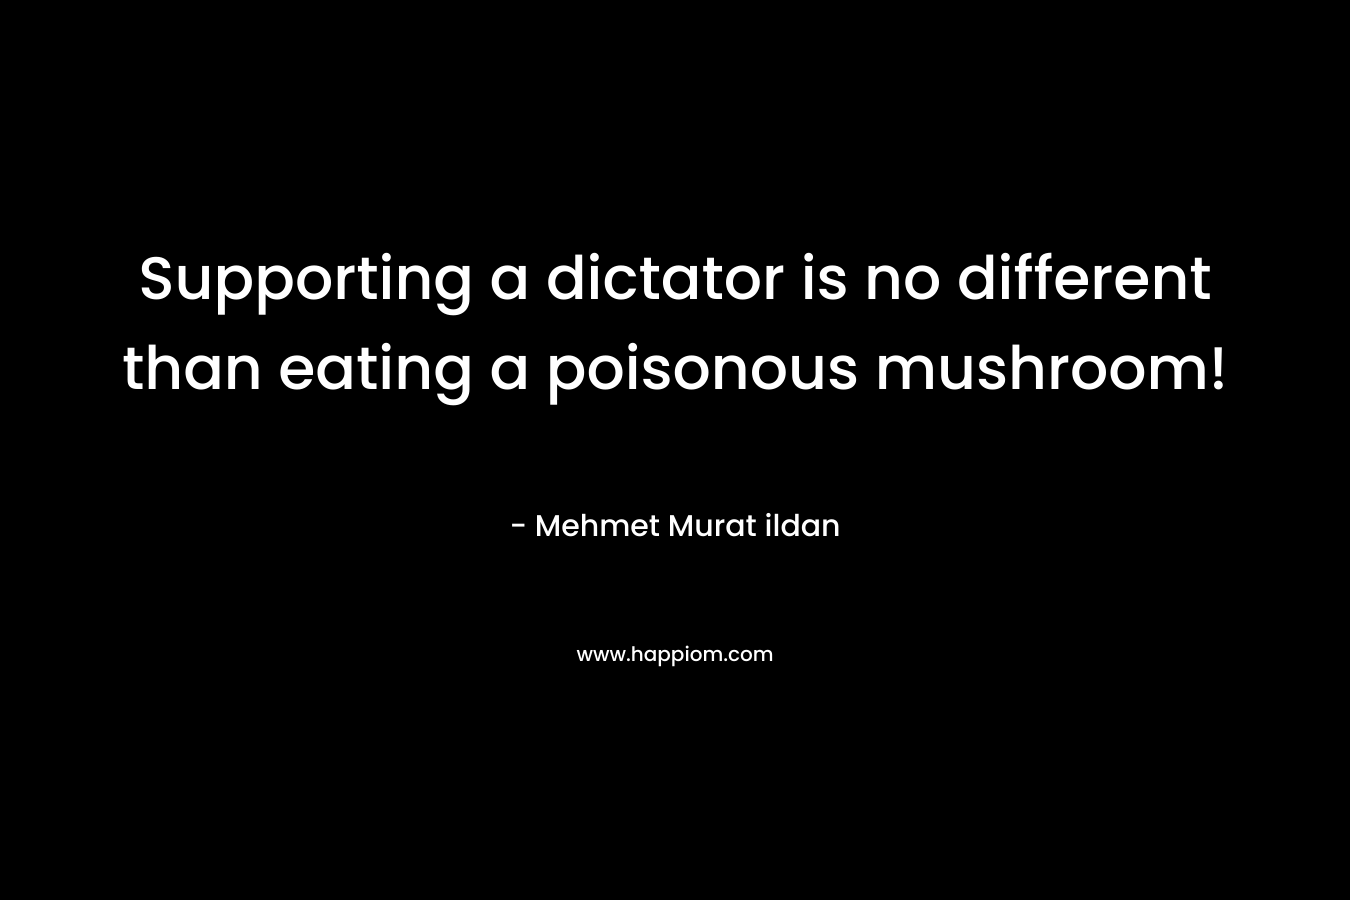 Supporting a dictator is no different than eating a poisonous mushroom! – Mehmet Murat ildan